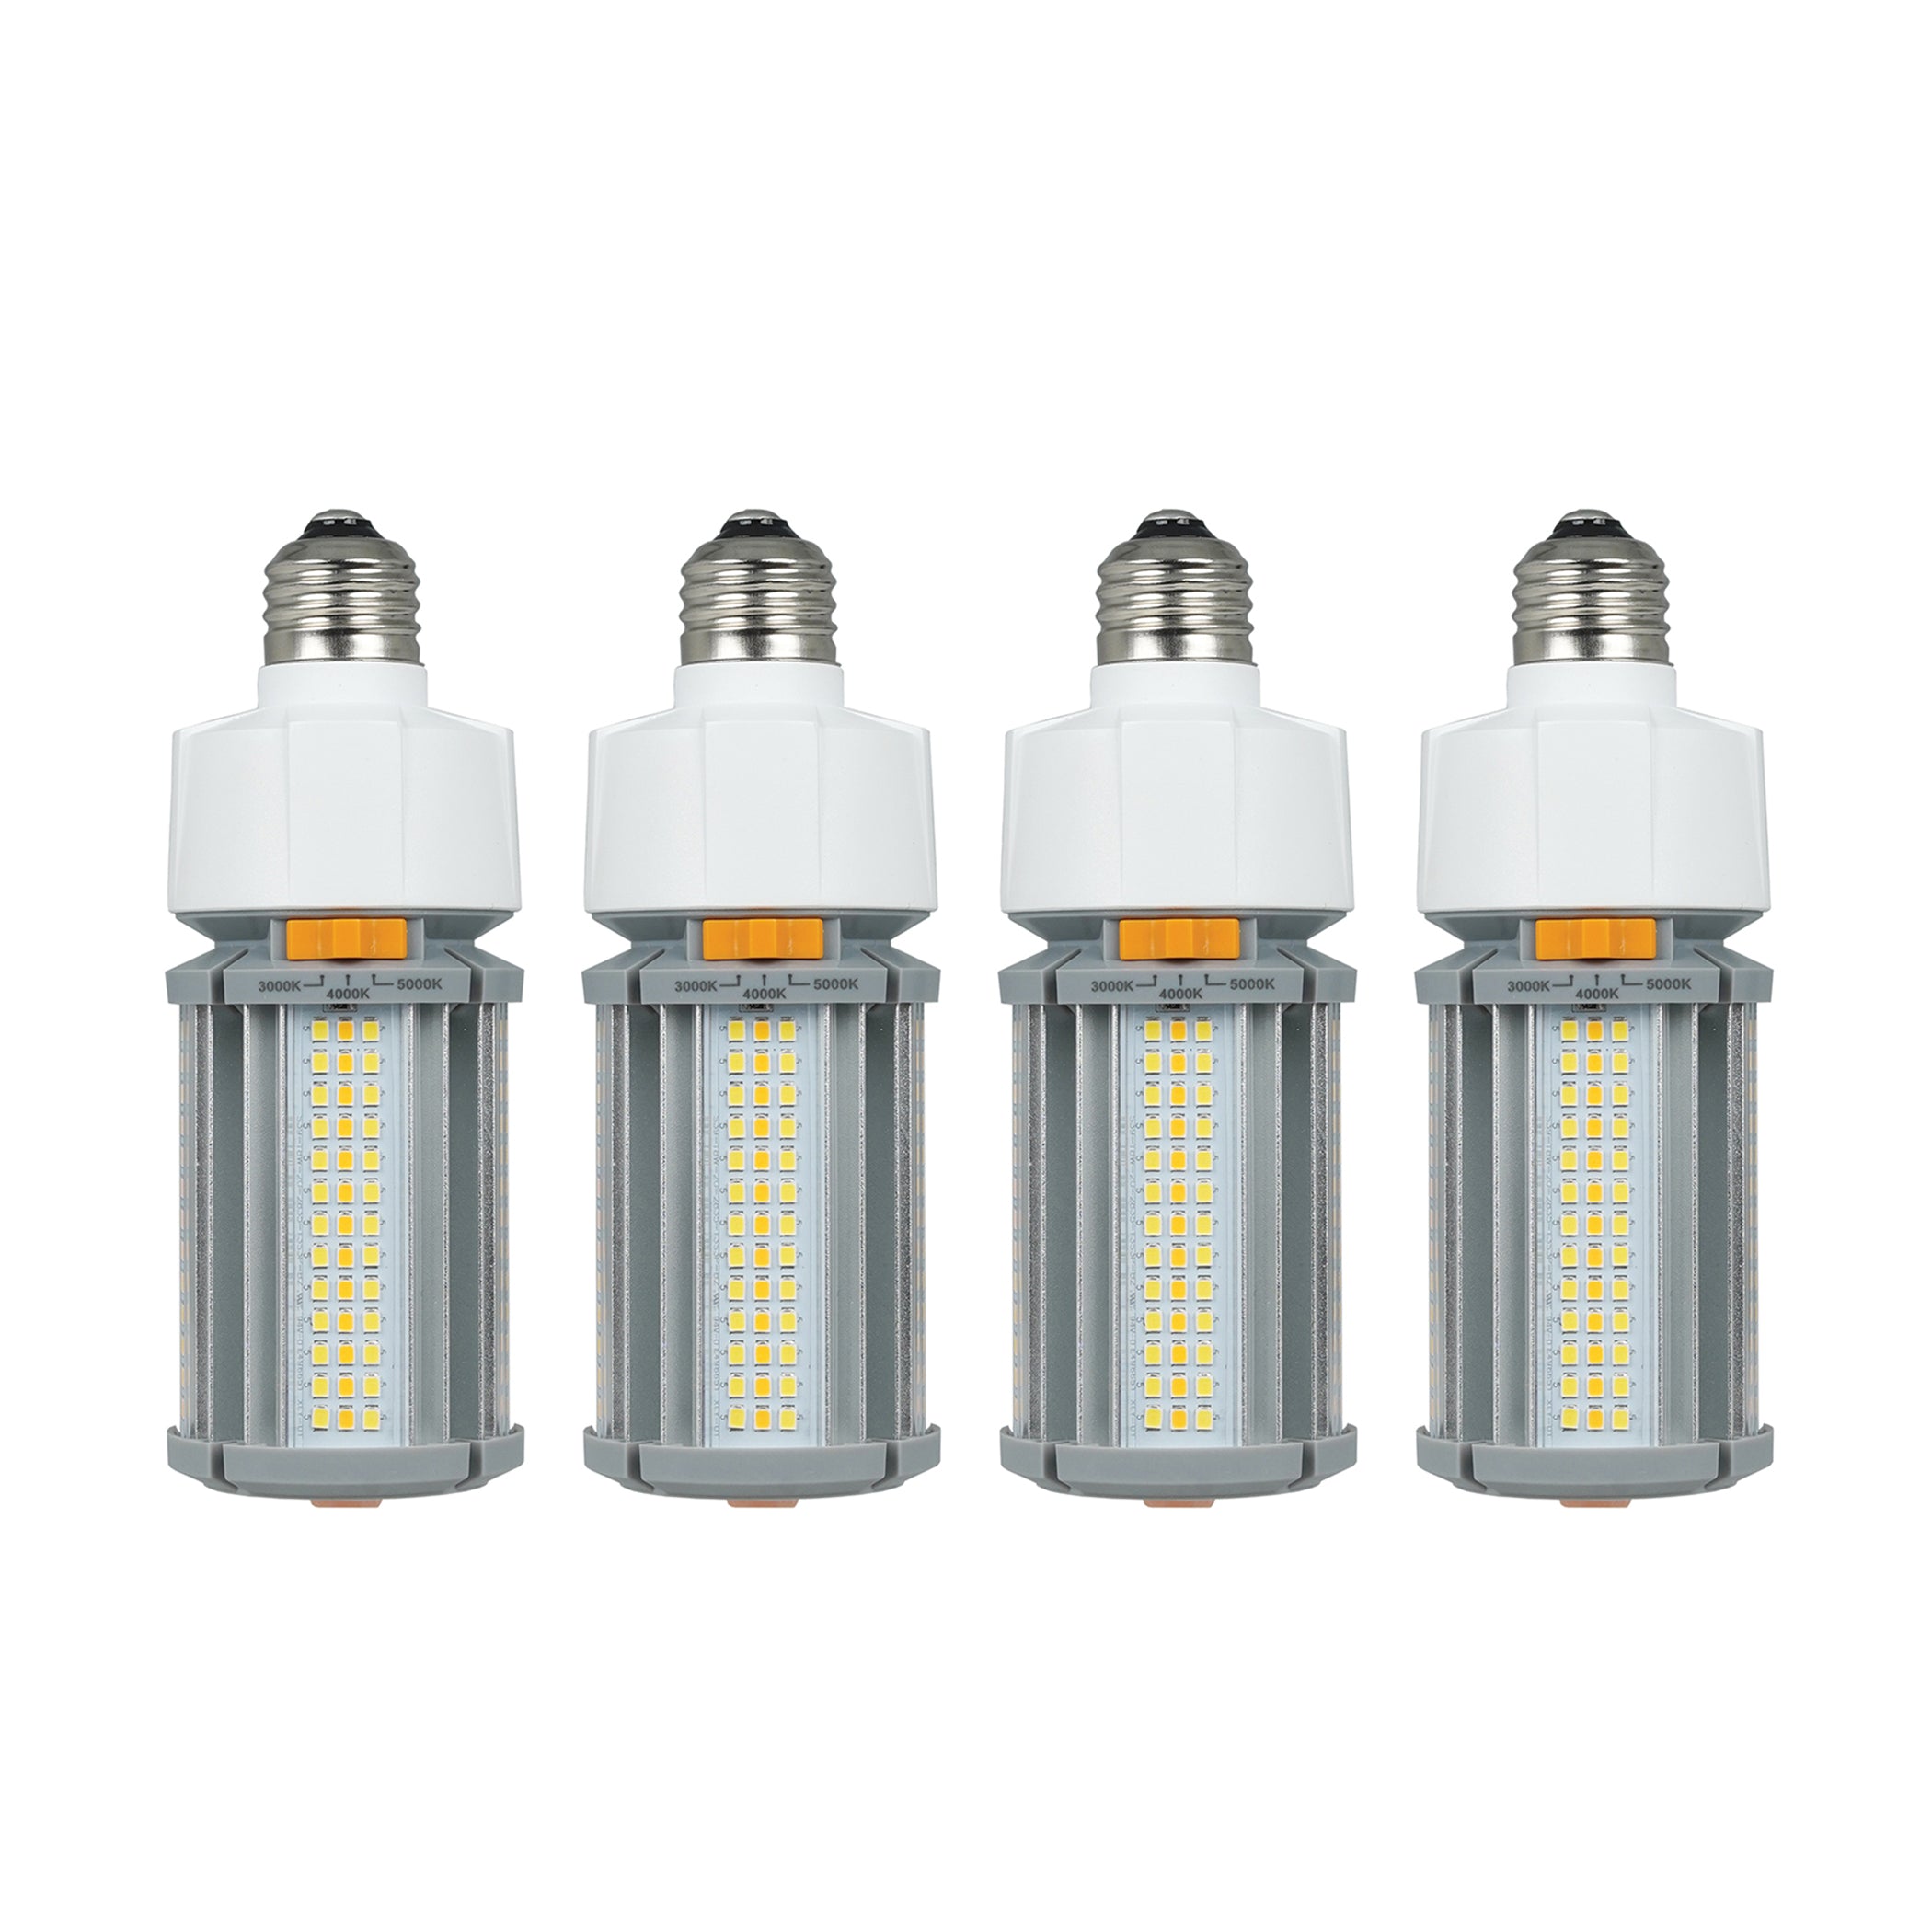 3 Wattage, 3 Colors, Selectable Output LED Corn Cob Bulb, Outdoor & Indoor Damp Rated, 2600 Lumen, 150-Watt Equivalent, E26